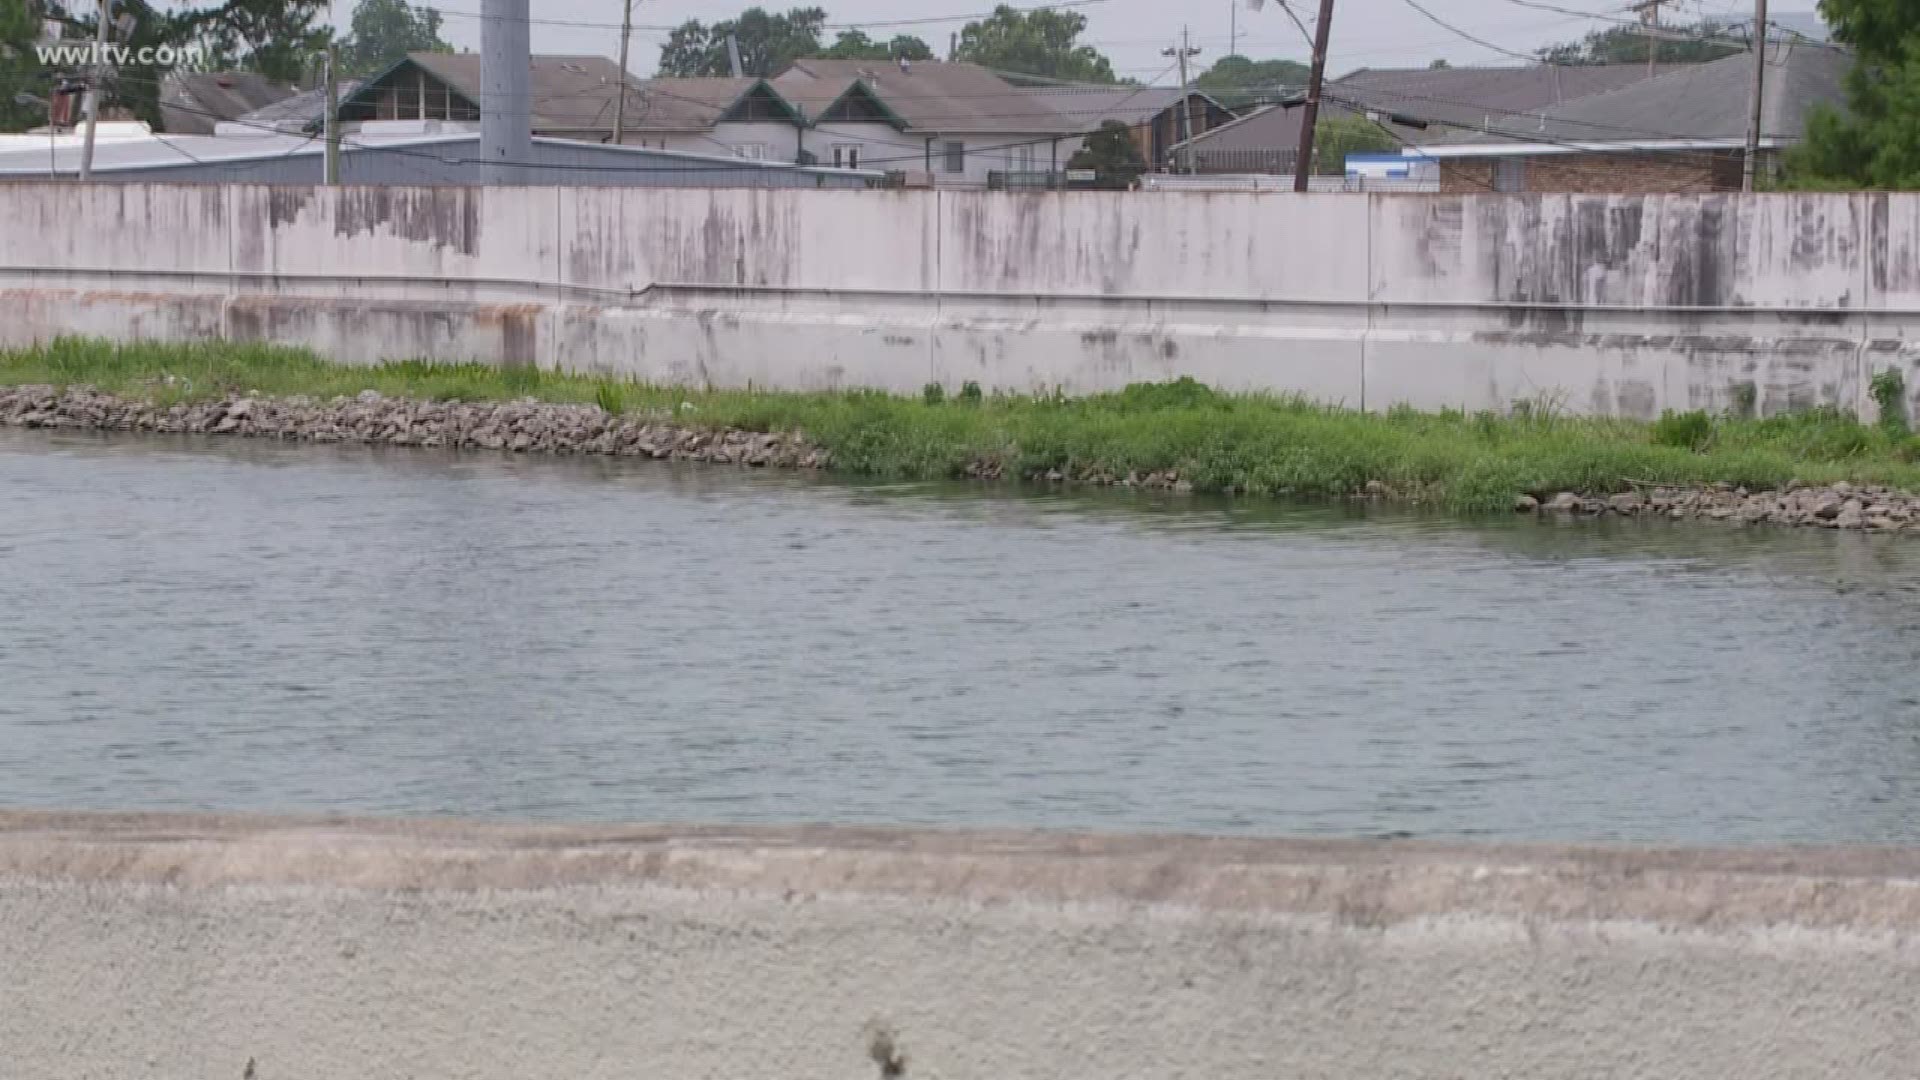 “The fact that these levees won't be certifiable in four years is a travesty."